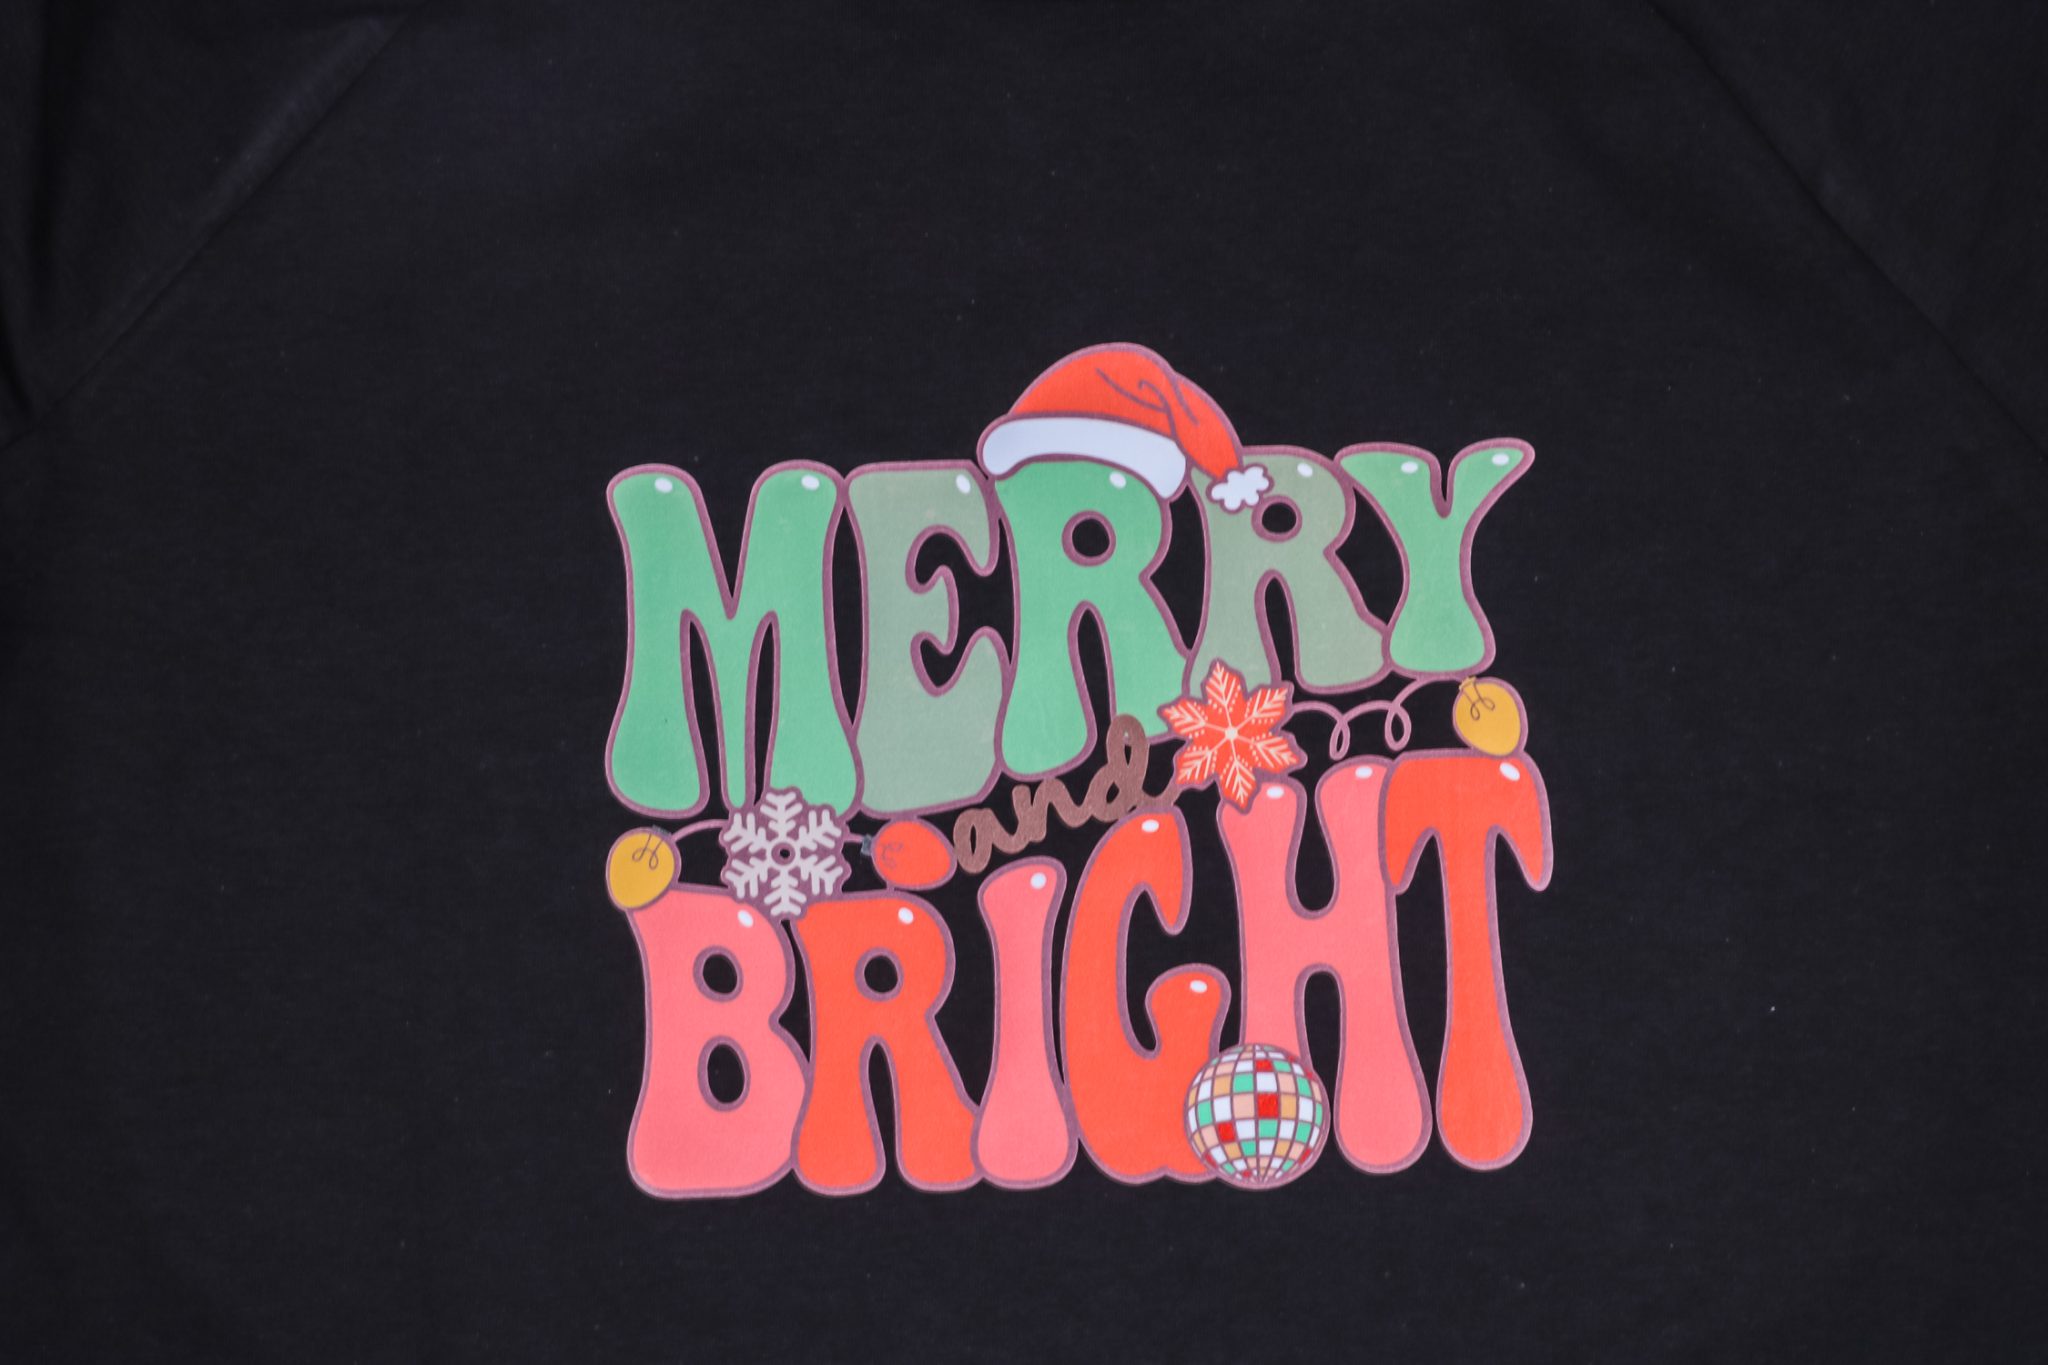 Finished Merry and Bright EasySubli shirt.